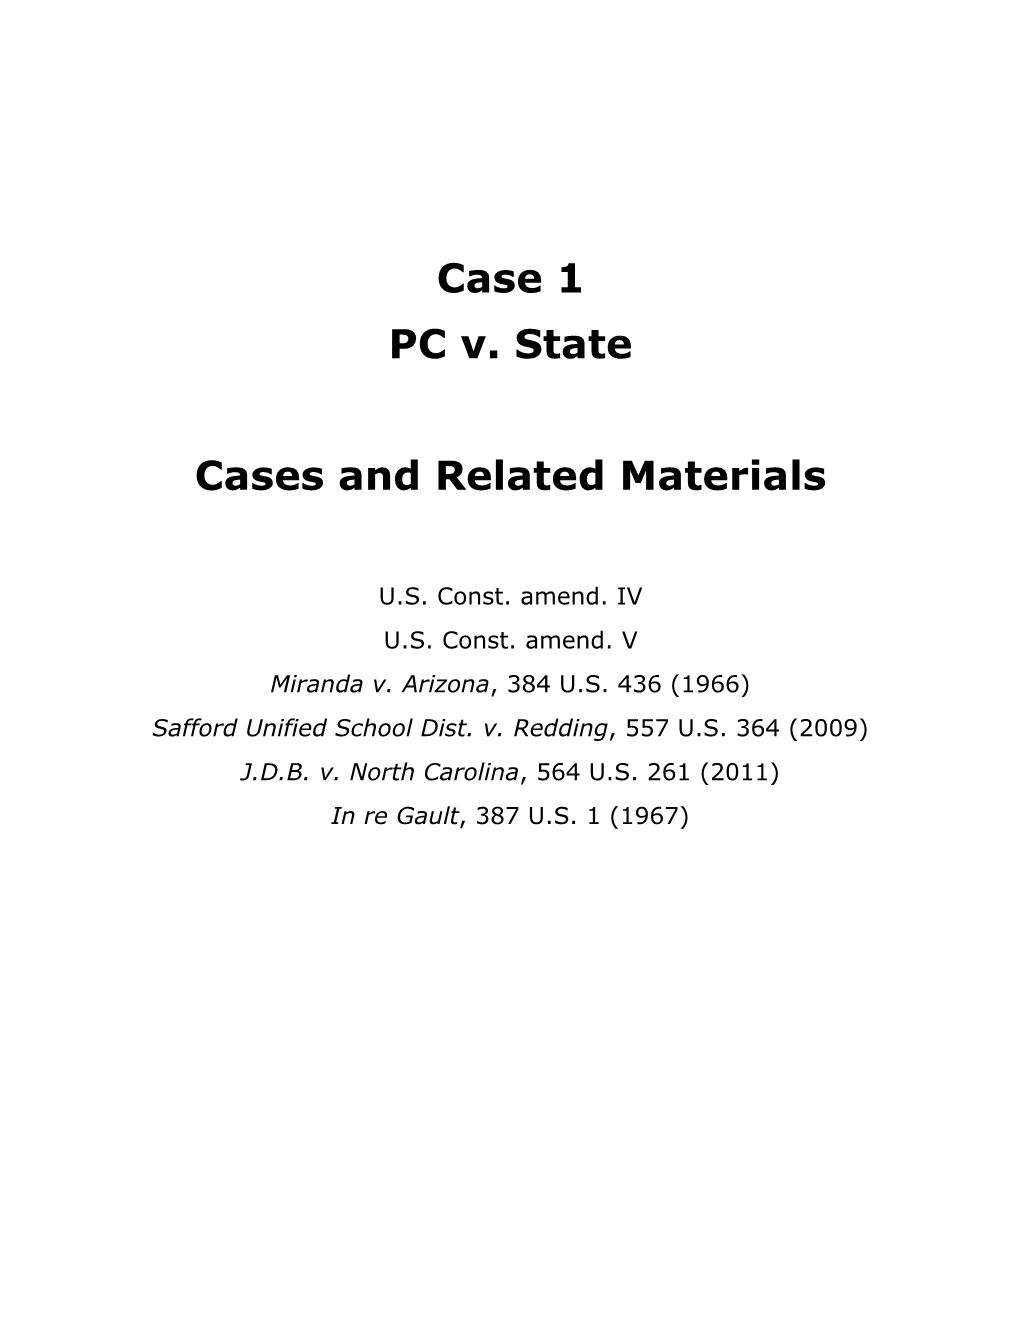 Case 1 PC V. State Cases and Related Materials